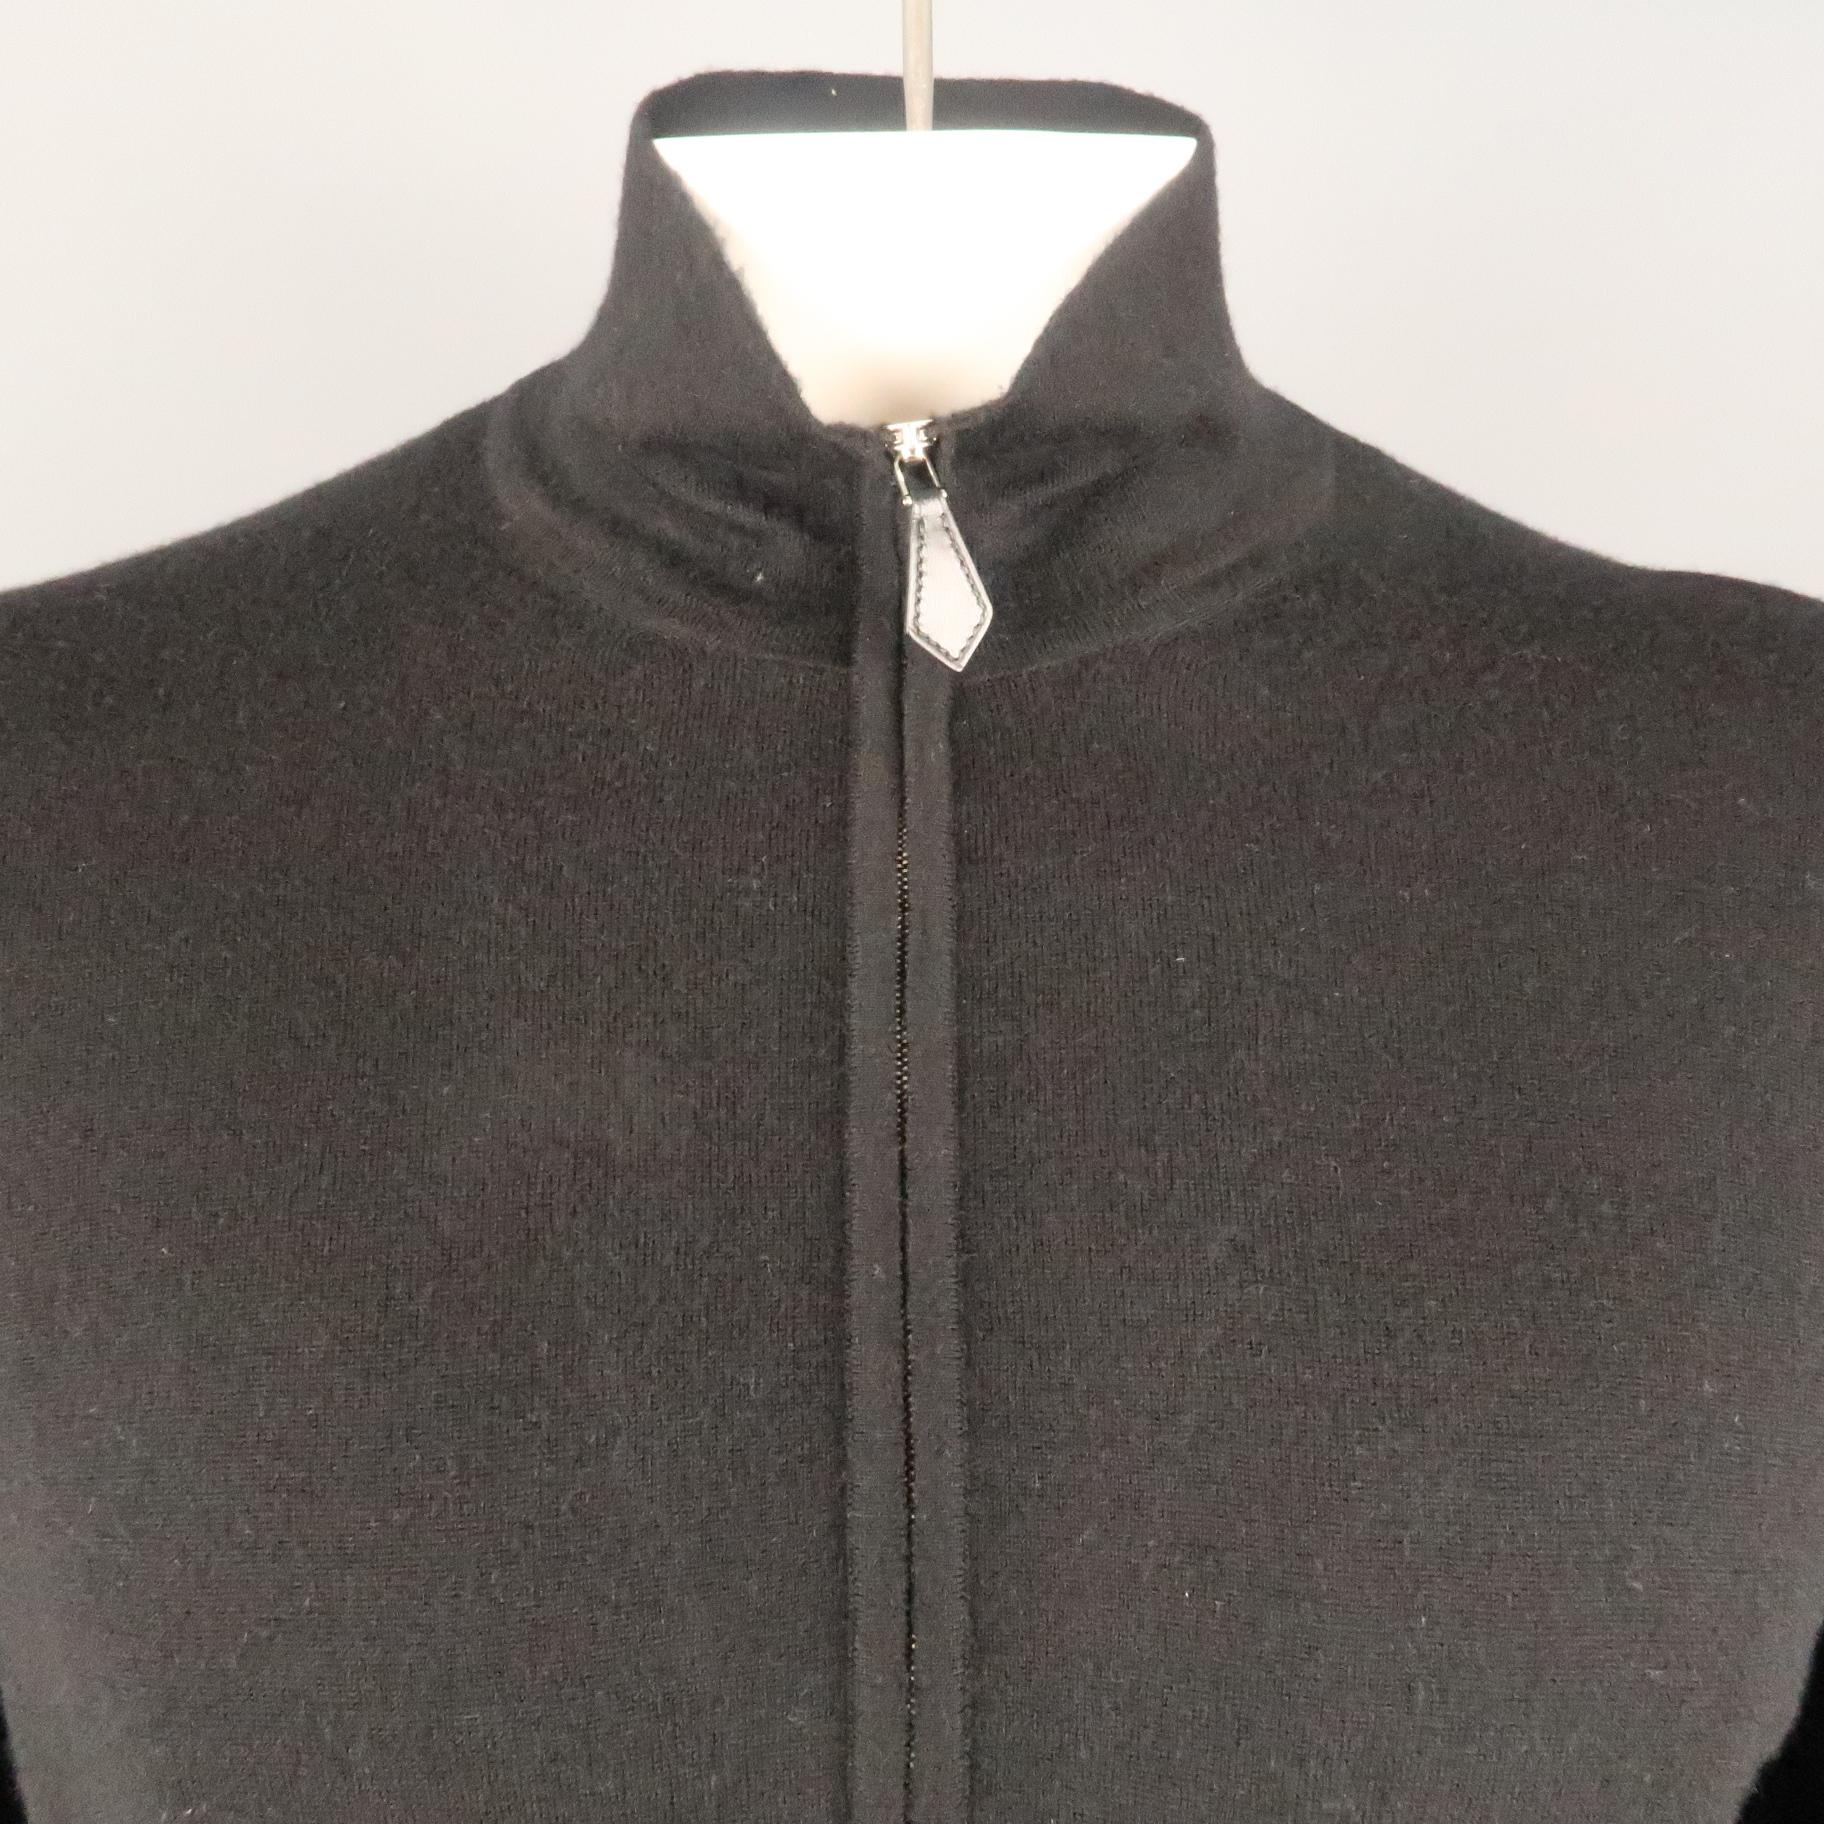 HERMES pullover comes in a black cashmere and silk featuring a half zip closure. Made in Italy.
 
Very Good Pre-Owned Condition.
Marked:
 
Measurements:
 
Shoulder: 21 in.
Chest: 46 in.
Sleeve: 30 in.
Length: 28.5 in.